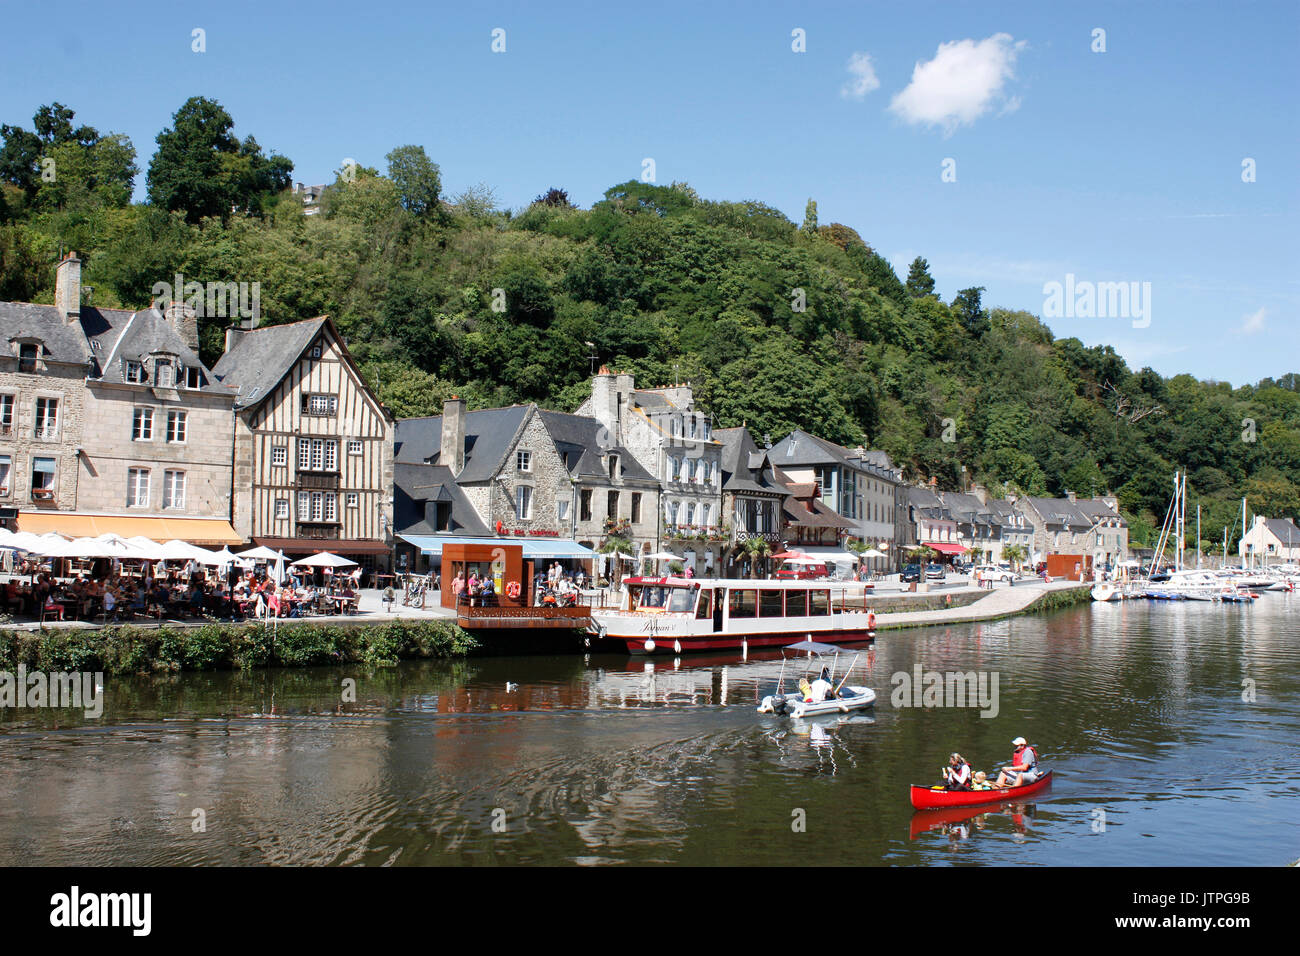 France. Brittany. Dinan. Harbourside houses and restaurants by River Rance with tourists in canoe and motor boat. Stock Photo